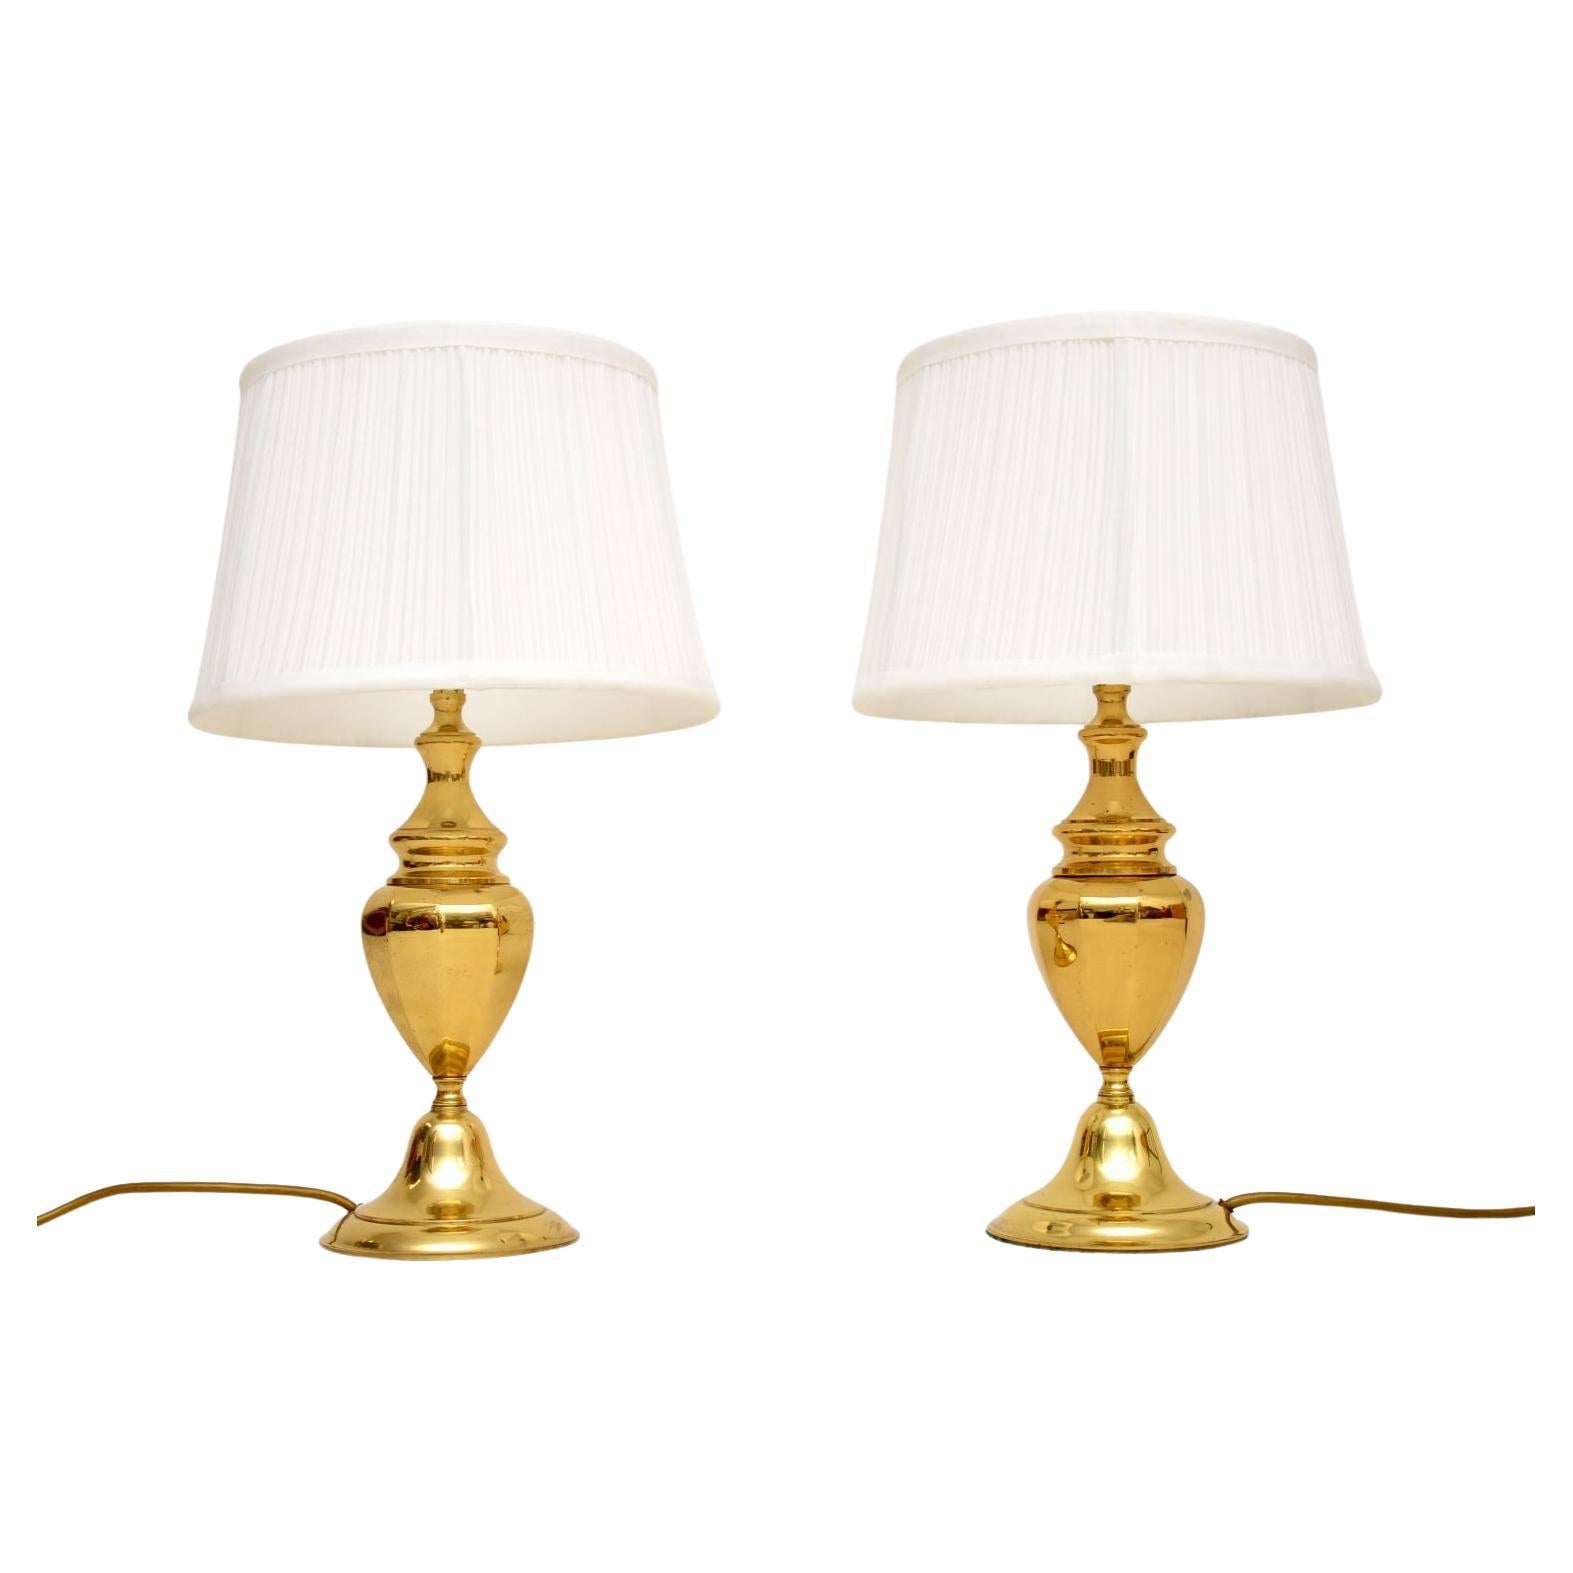 1970s Pair of Vintage Brass Table Lamps